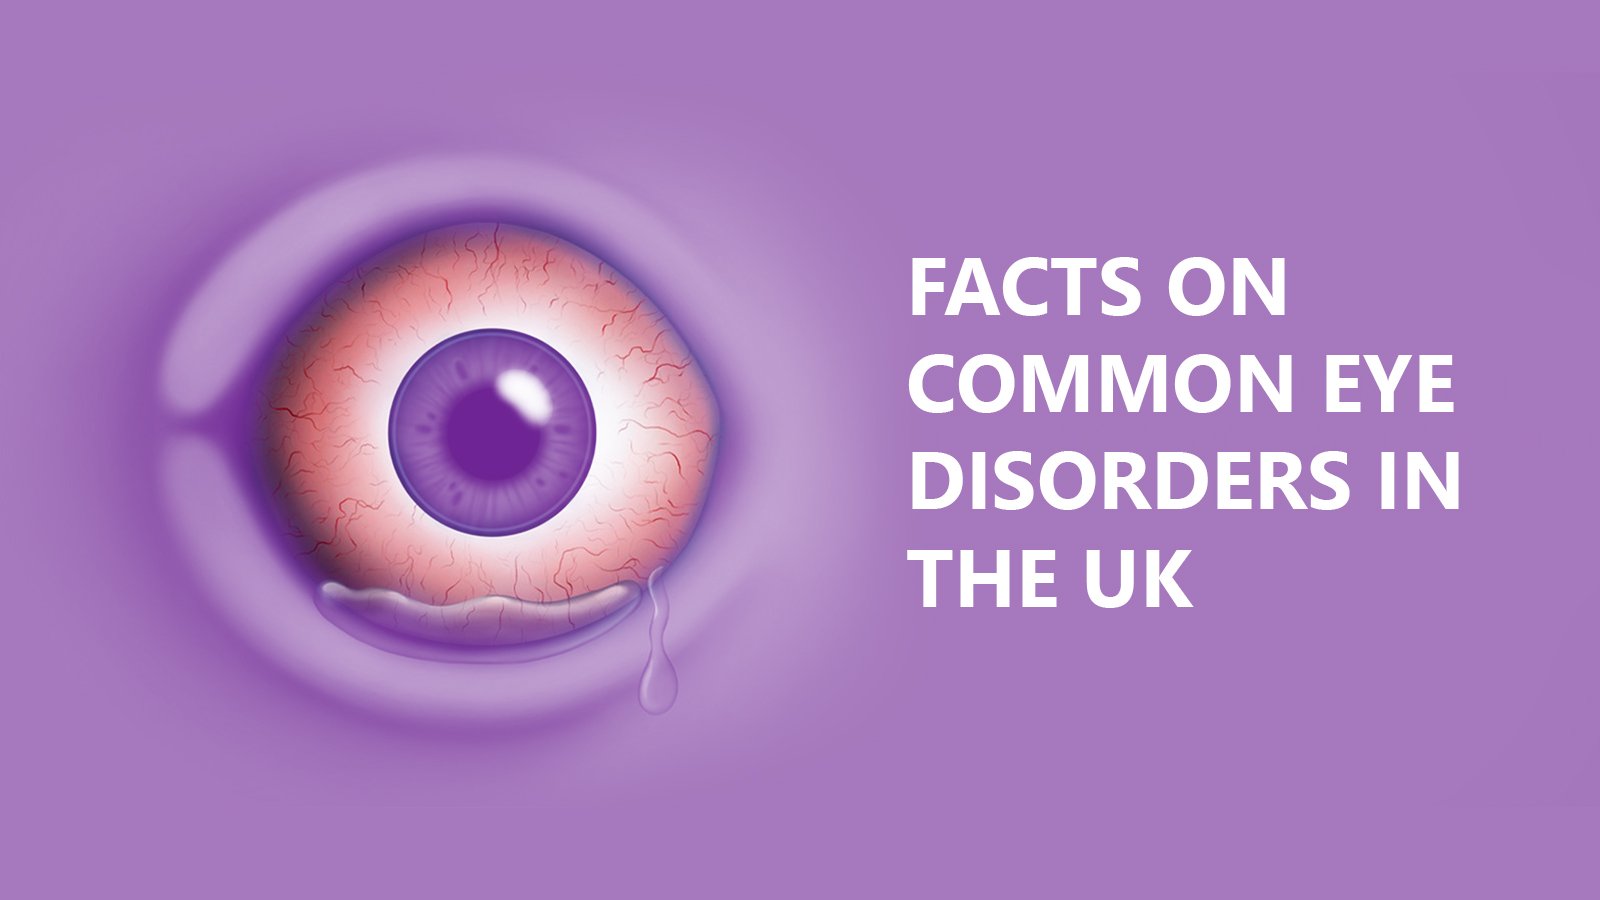 7 Facts on common eye disorders in the UK